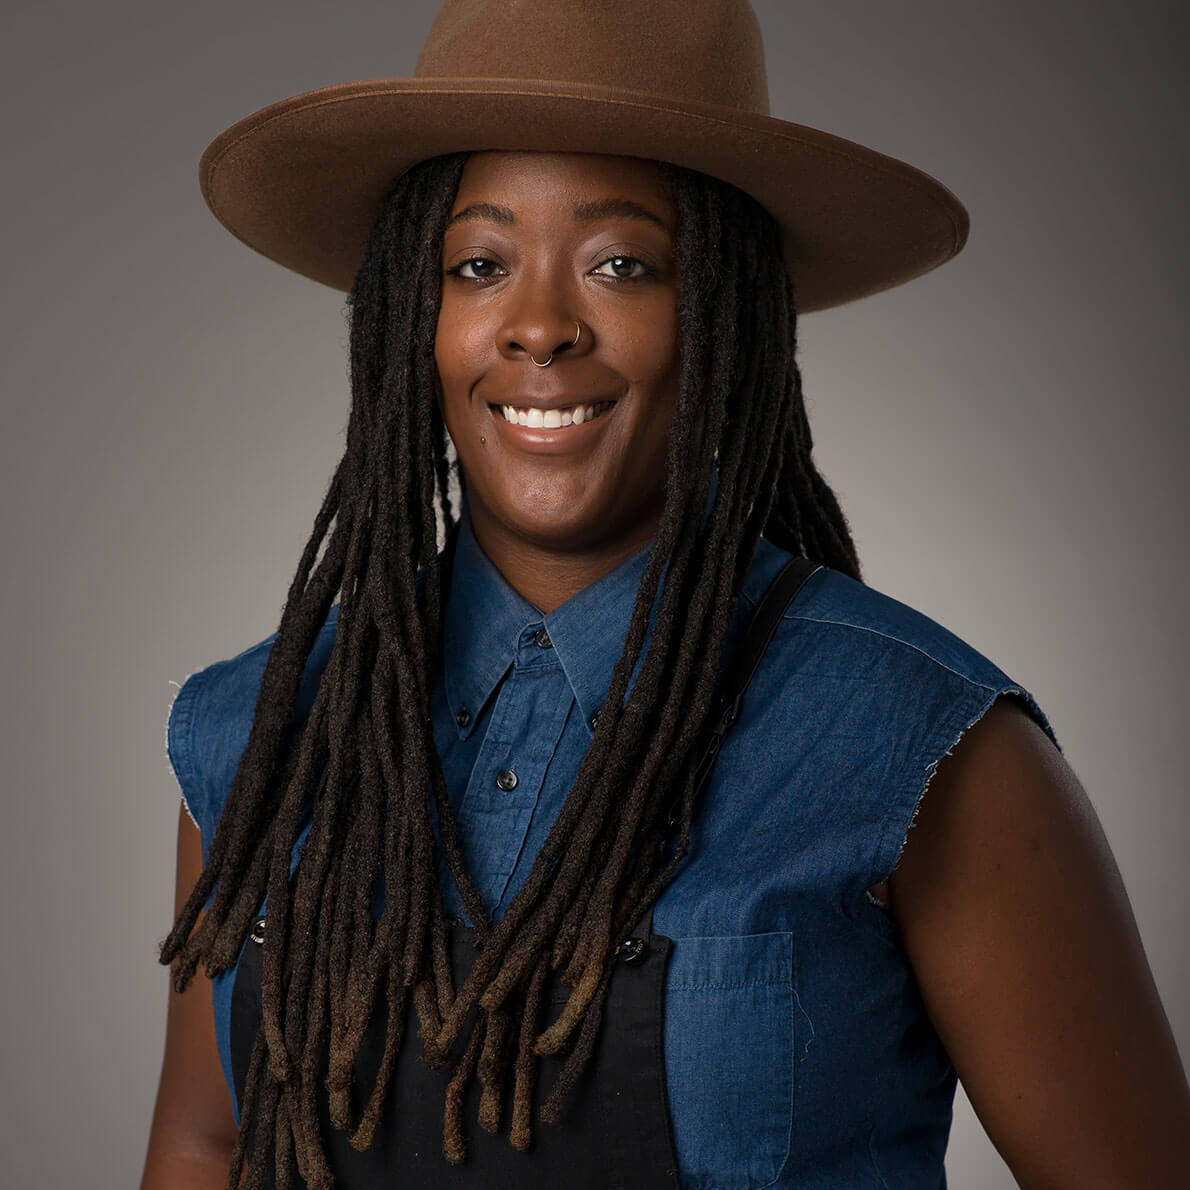 A headshot of woman with long dreadlocks, wearing a denim shirt and overalls.